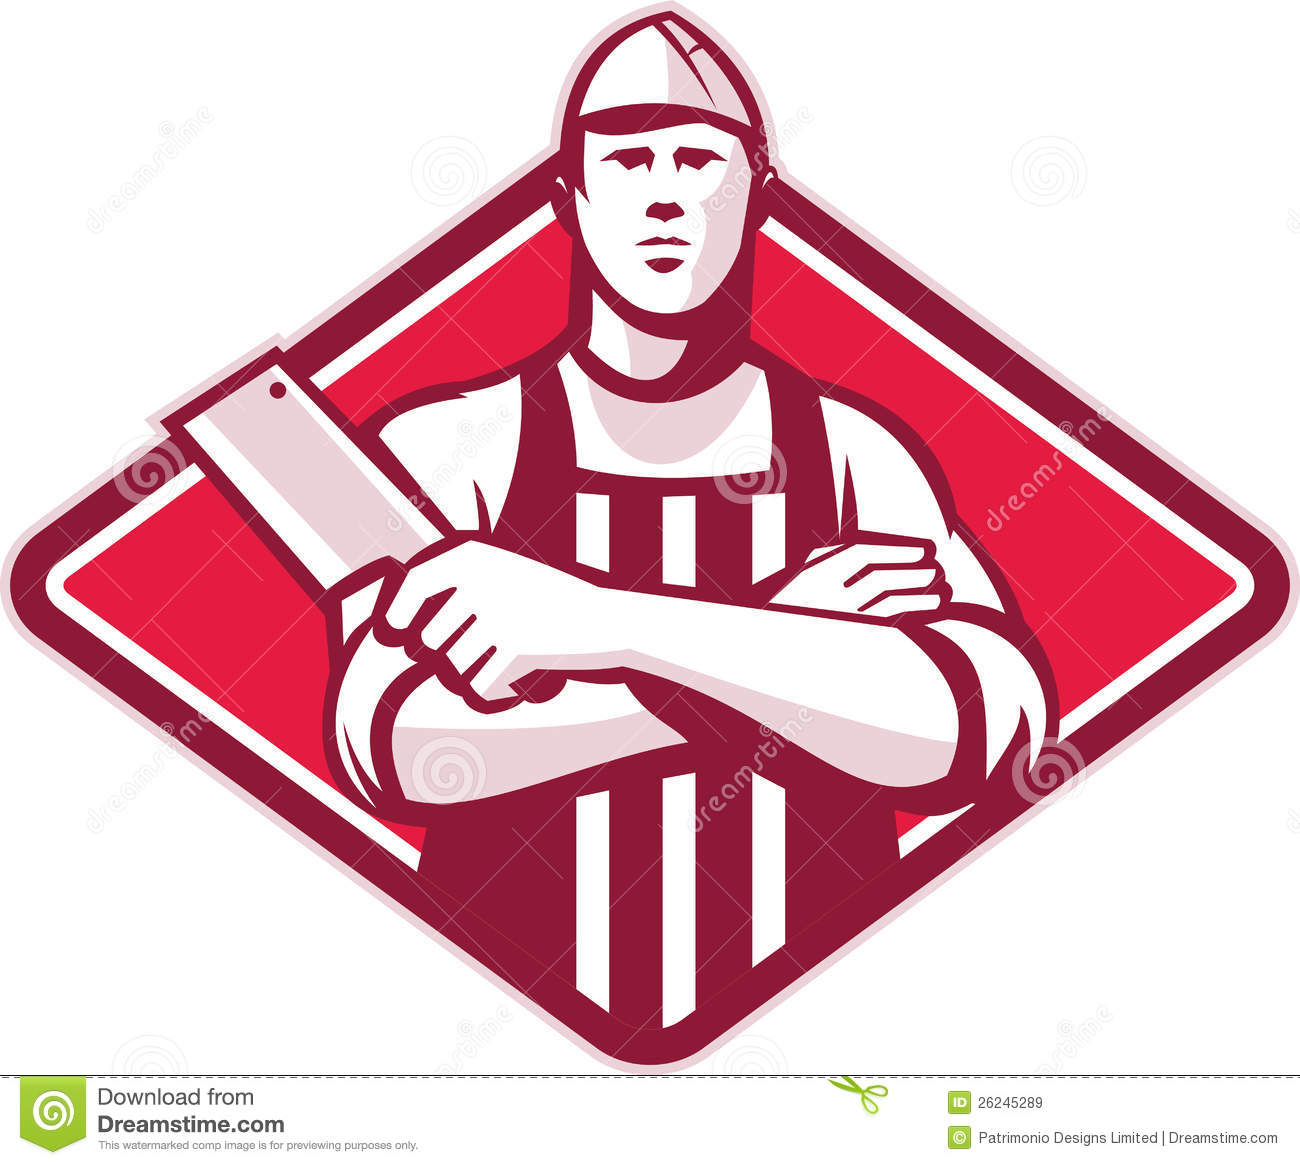 Retro Style Illustration Of A Butcher Cutter Worker With Meat Cleaver